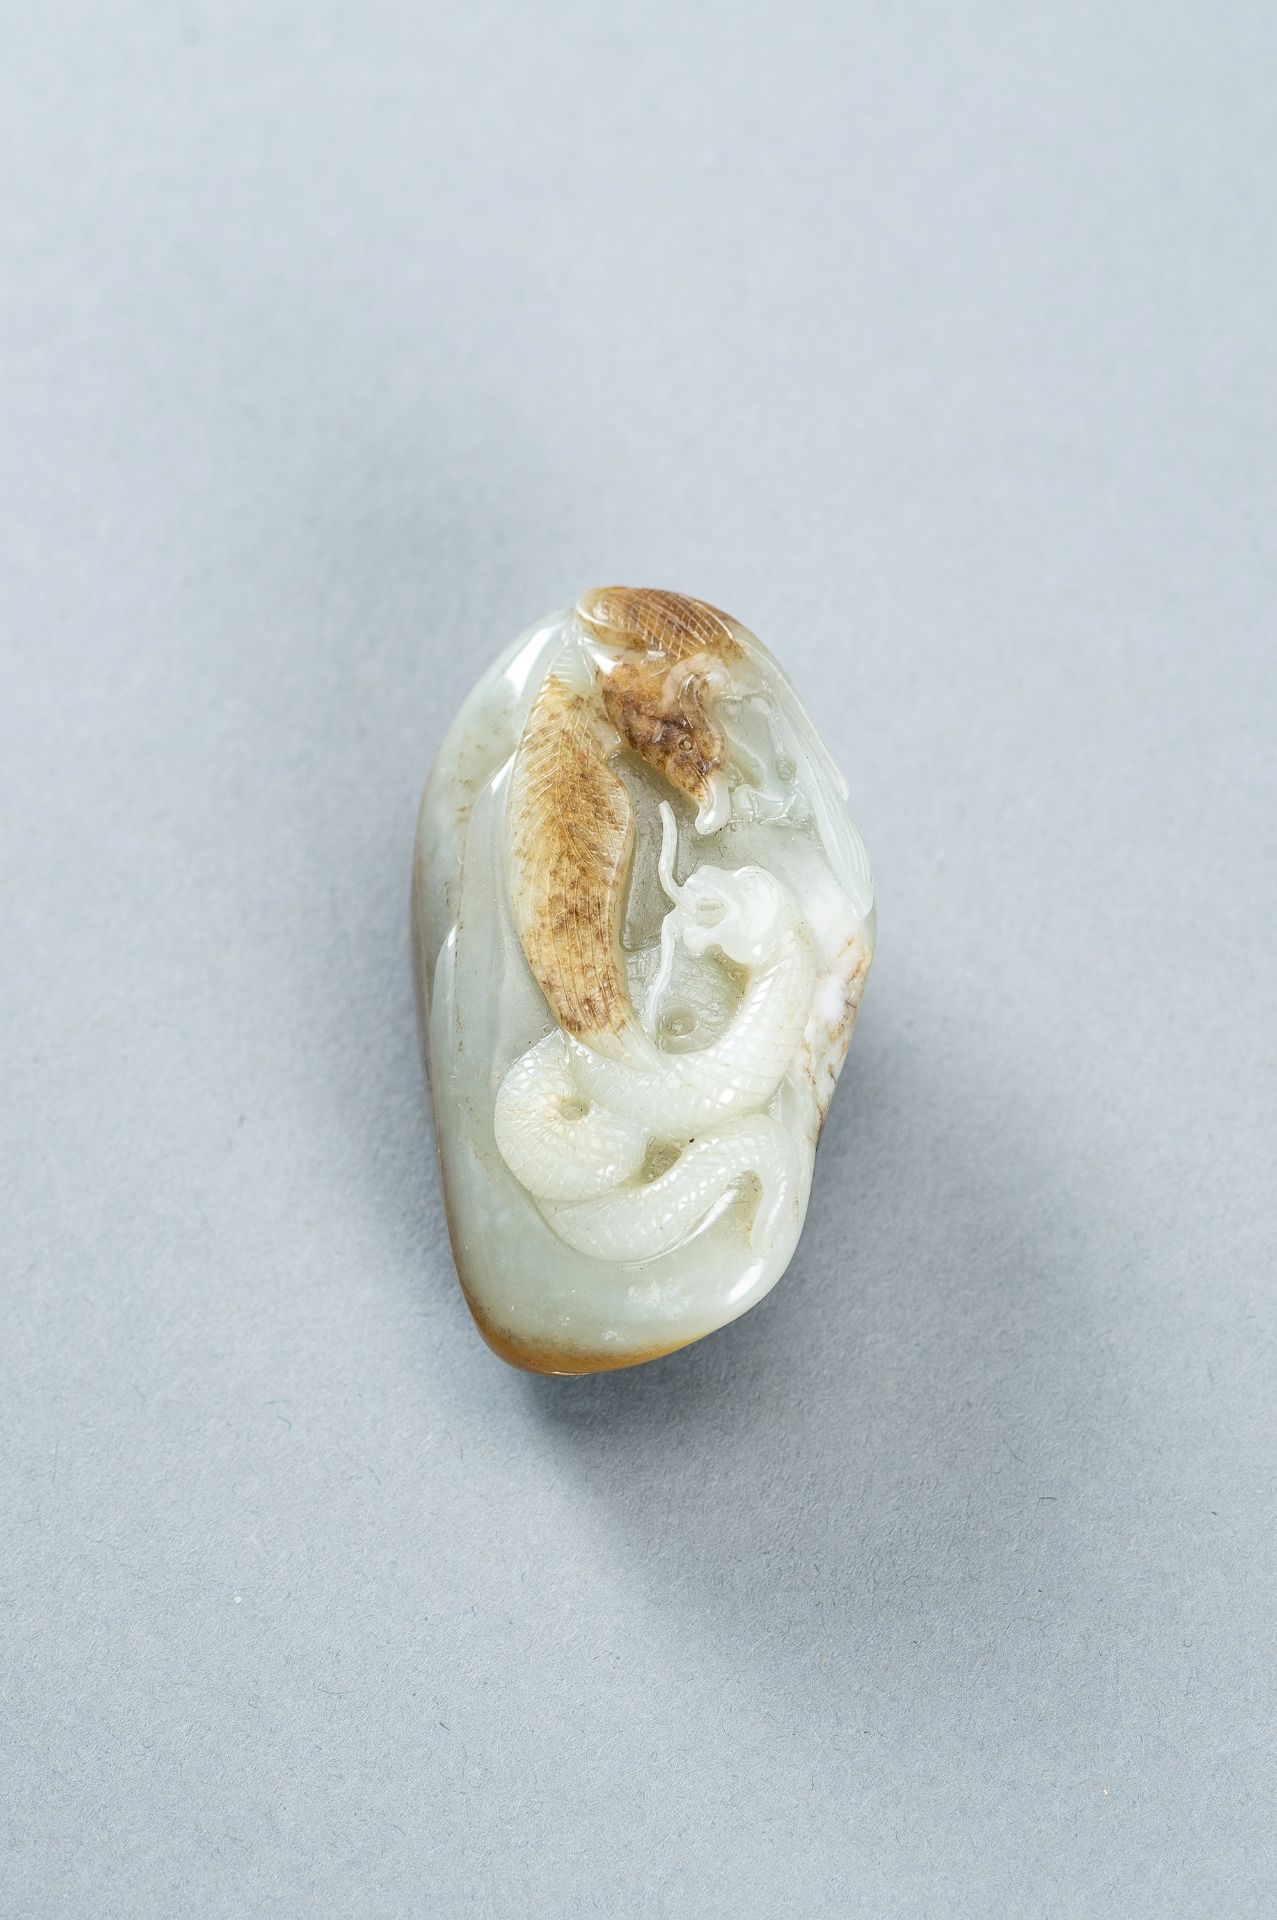 A CELADON AND RUSSET JADE 'EAGLE AND SNAKE' PENDANT, c. 1920s - Image 6 of 9